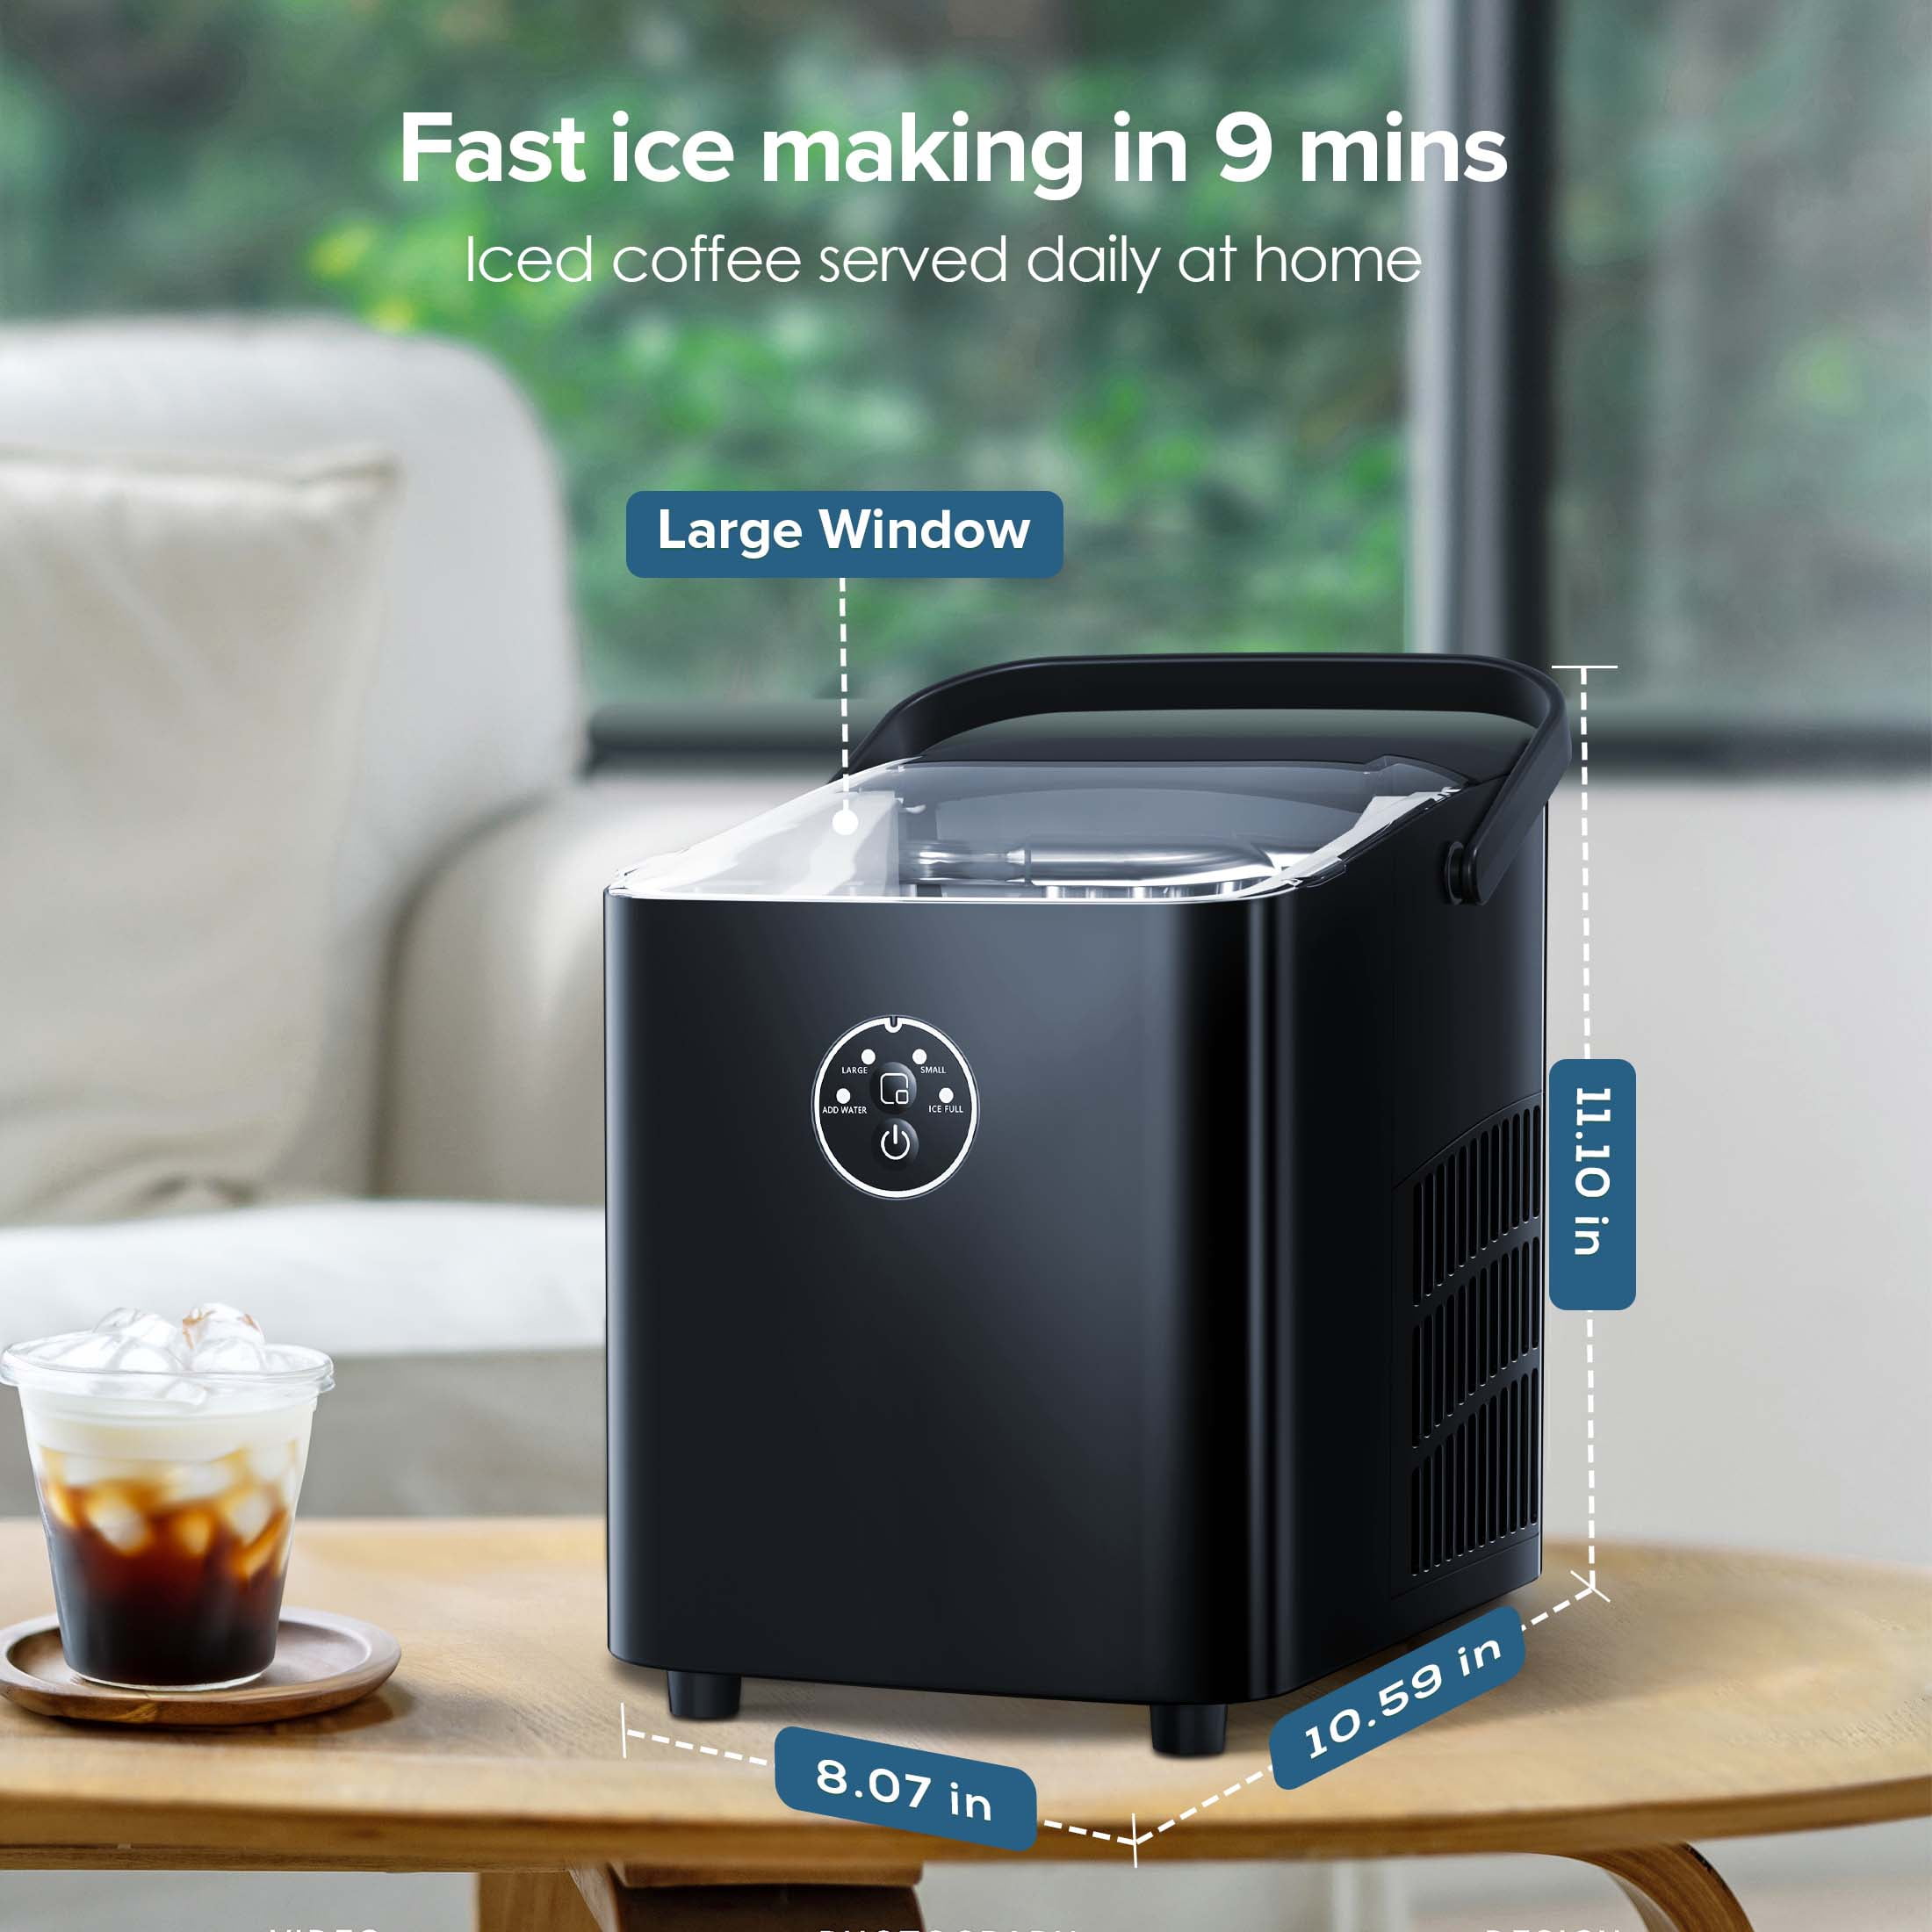 Appliance Science: The cool physics of ice makers - CNET